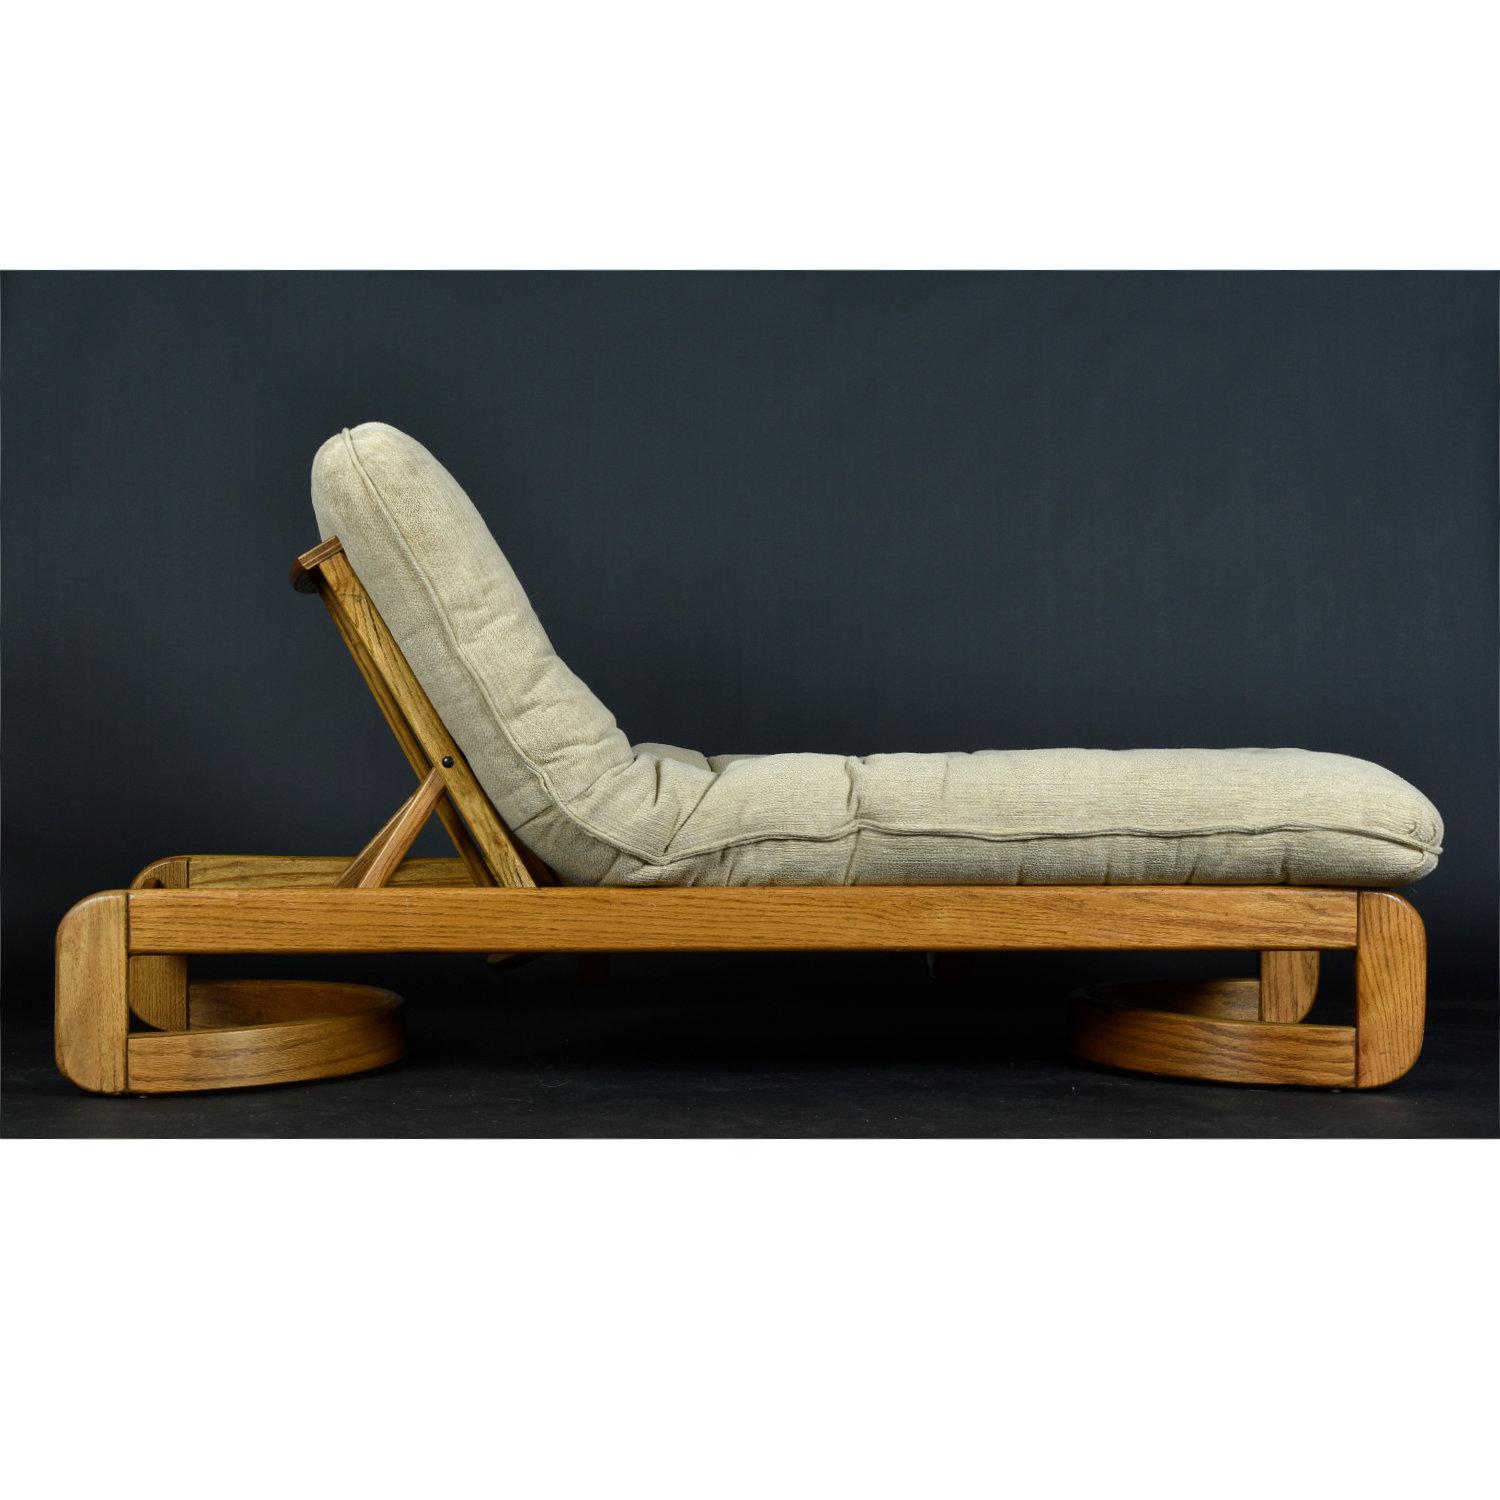 American Mid-Century Modern Restored Adjustable Oak Chaise Lounge Daybed by Howard MFG